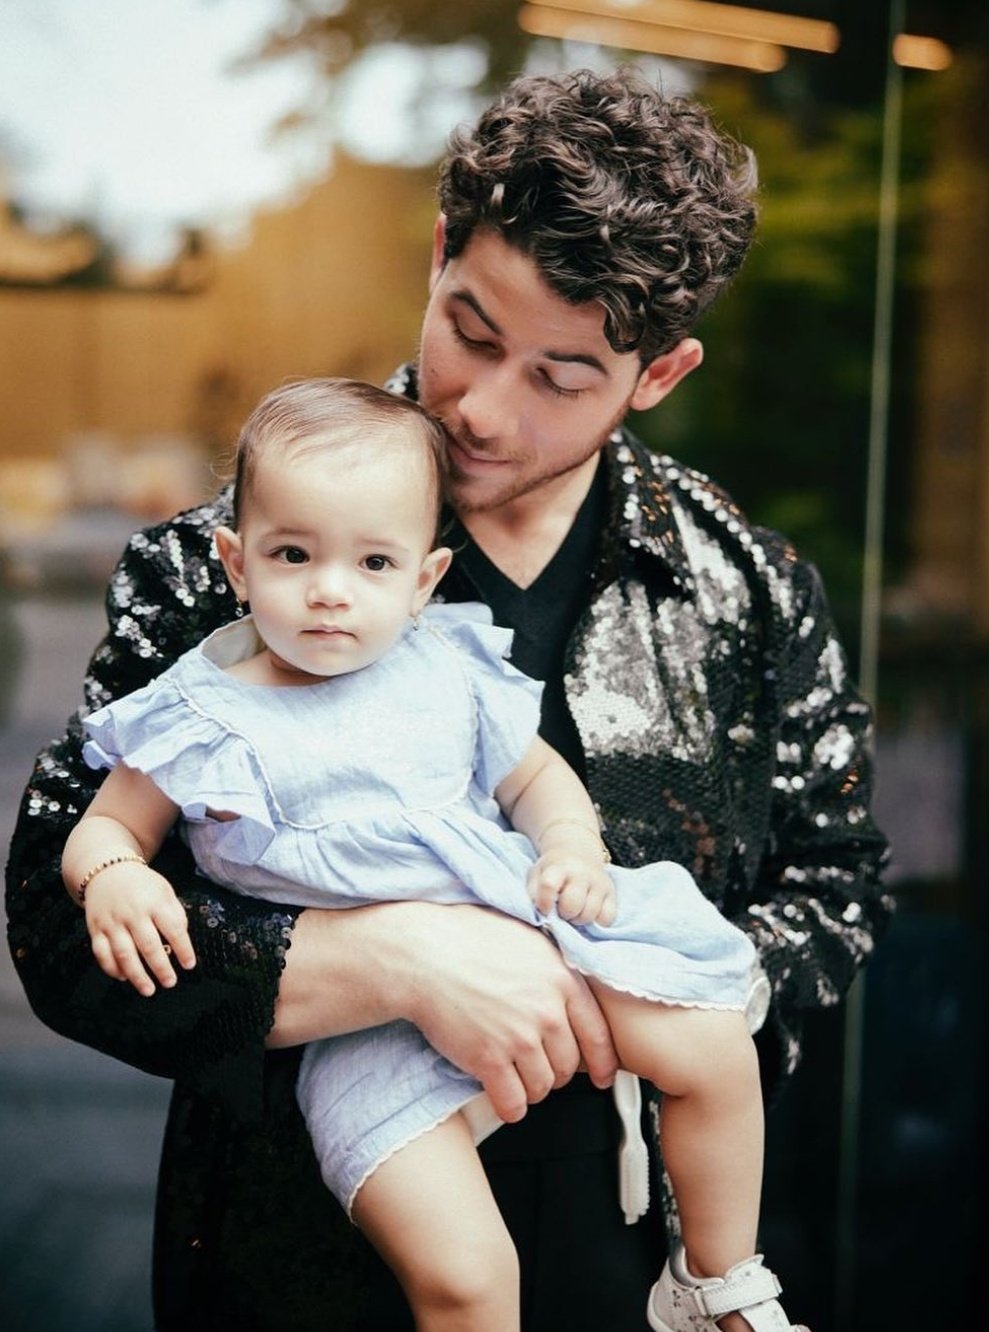 American singer and actor Nick Jonas shares adorable picture with daughter Malti.